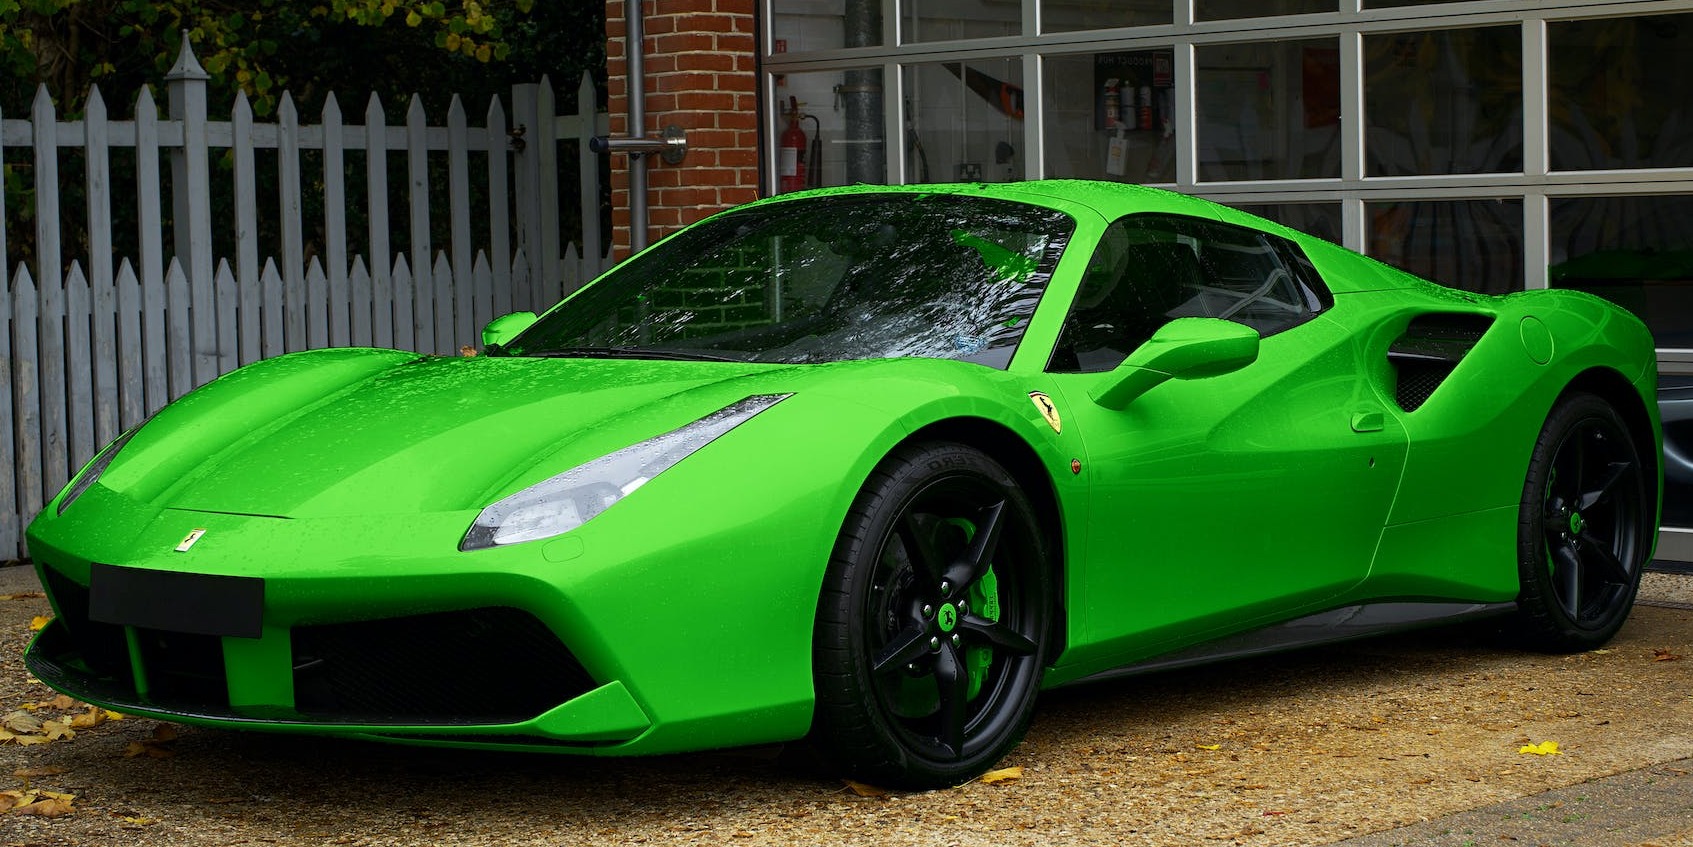 Exploring the Kent Countryside: A Guide to Supercar Rentals